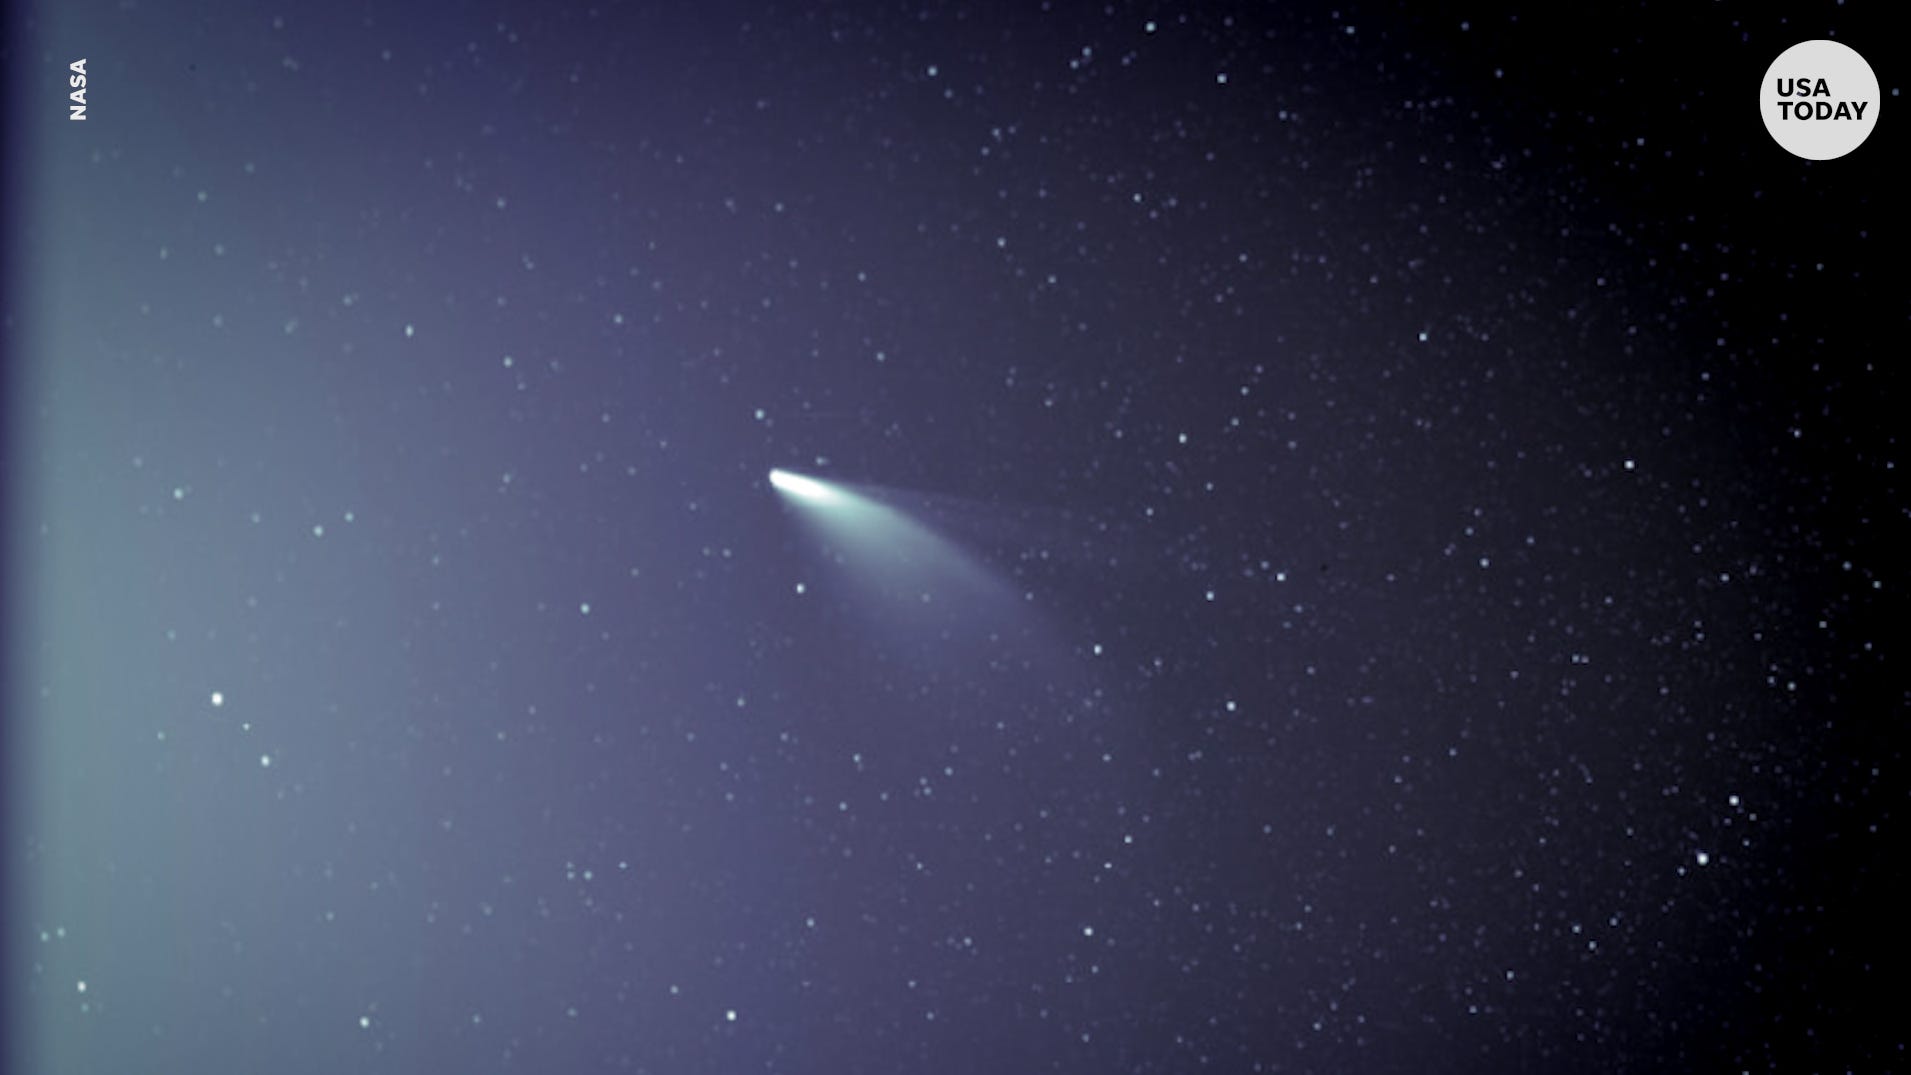 Comet Neowise Coming To The Night Sky This Week Near The Big Dipper